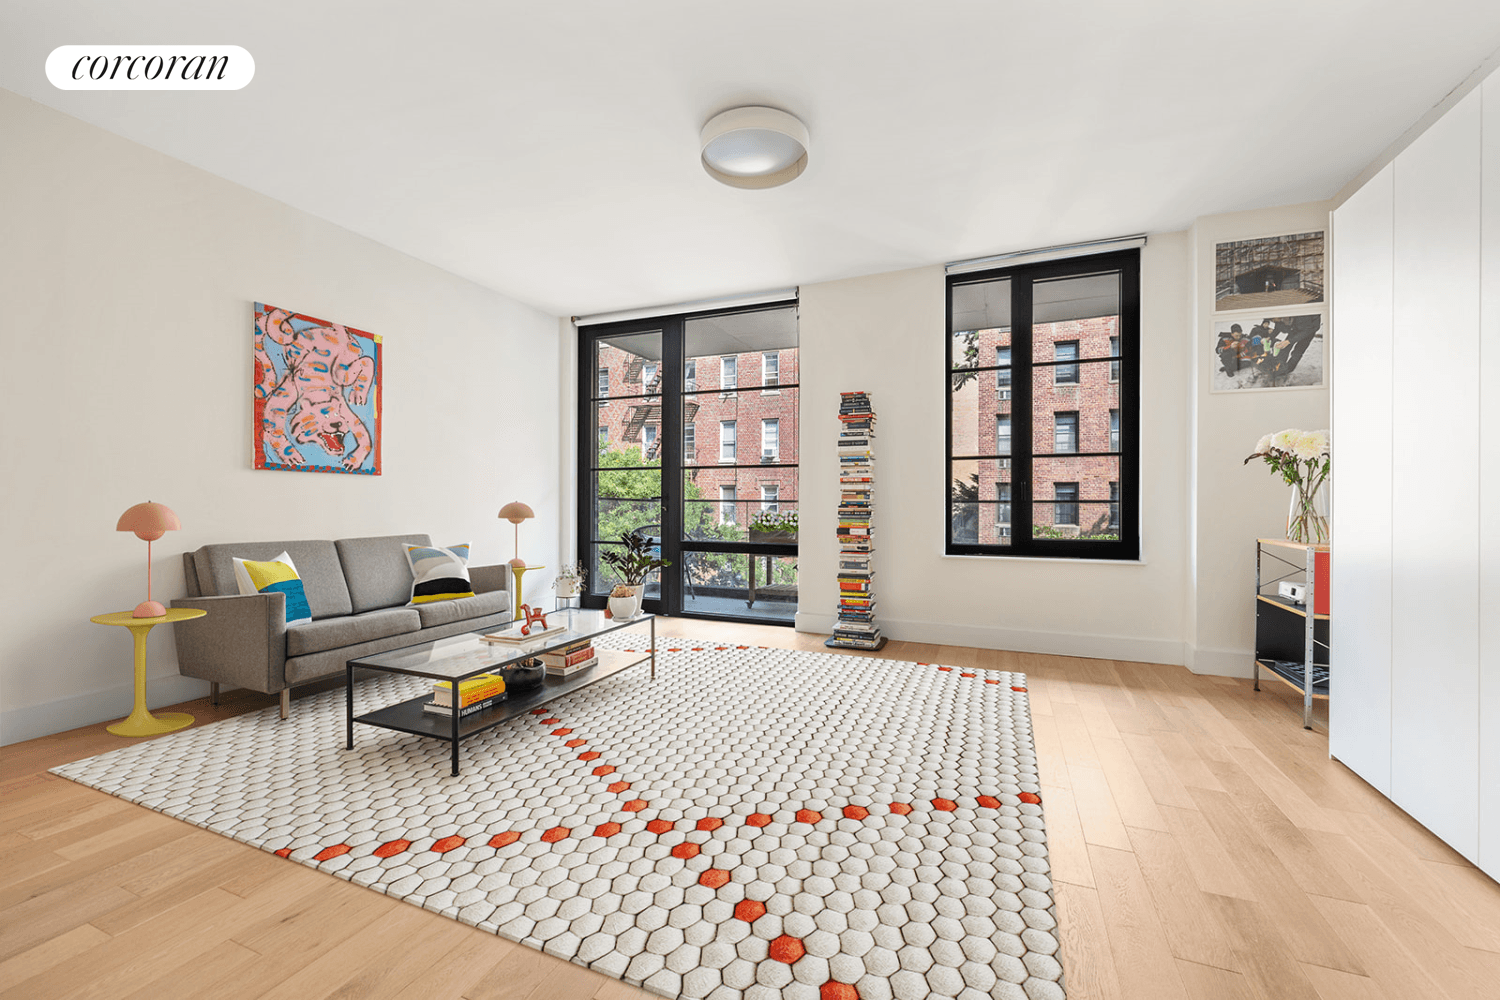 264 Webster Ave. Unit 309 is a spacious sun filled studio that could easily convert to a ONE BEDROOM see alternate floor plan with a large private balcony located at ...